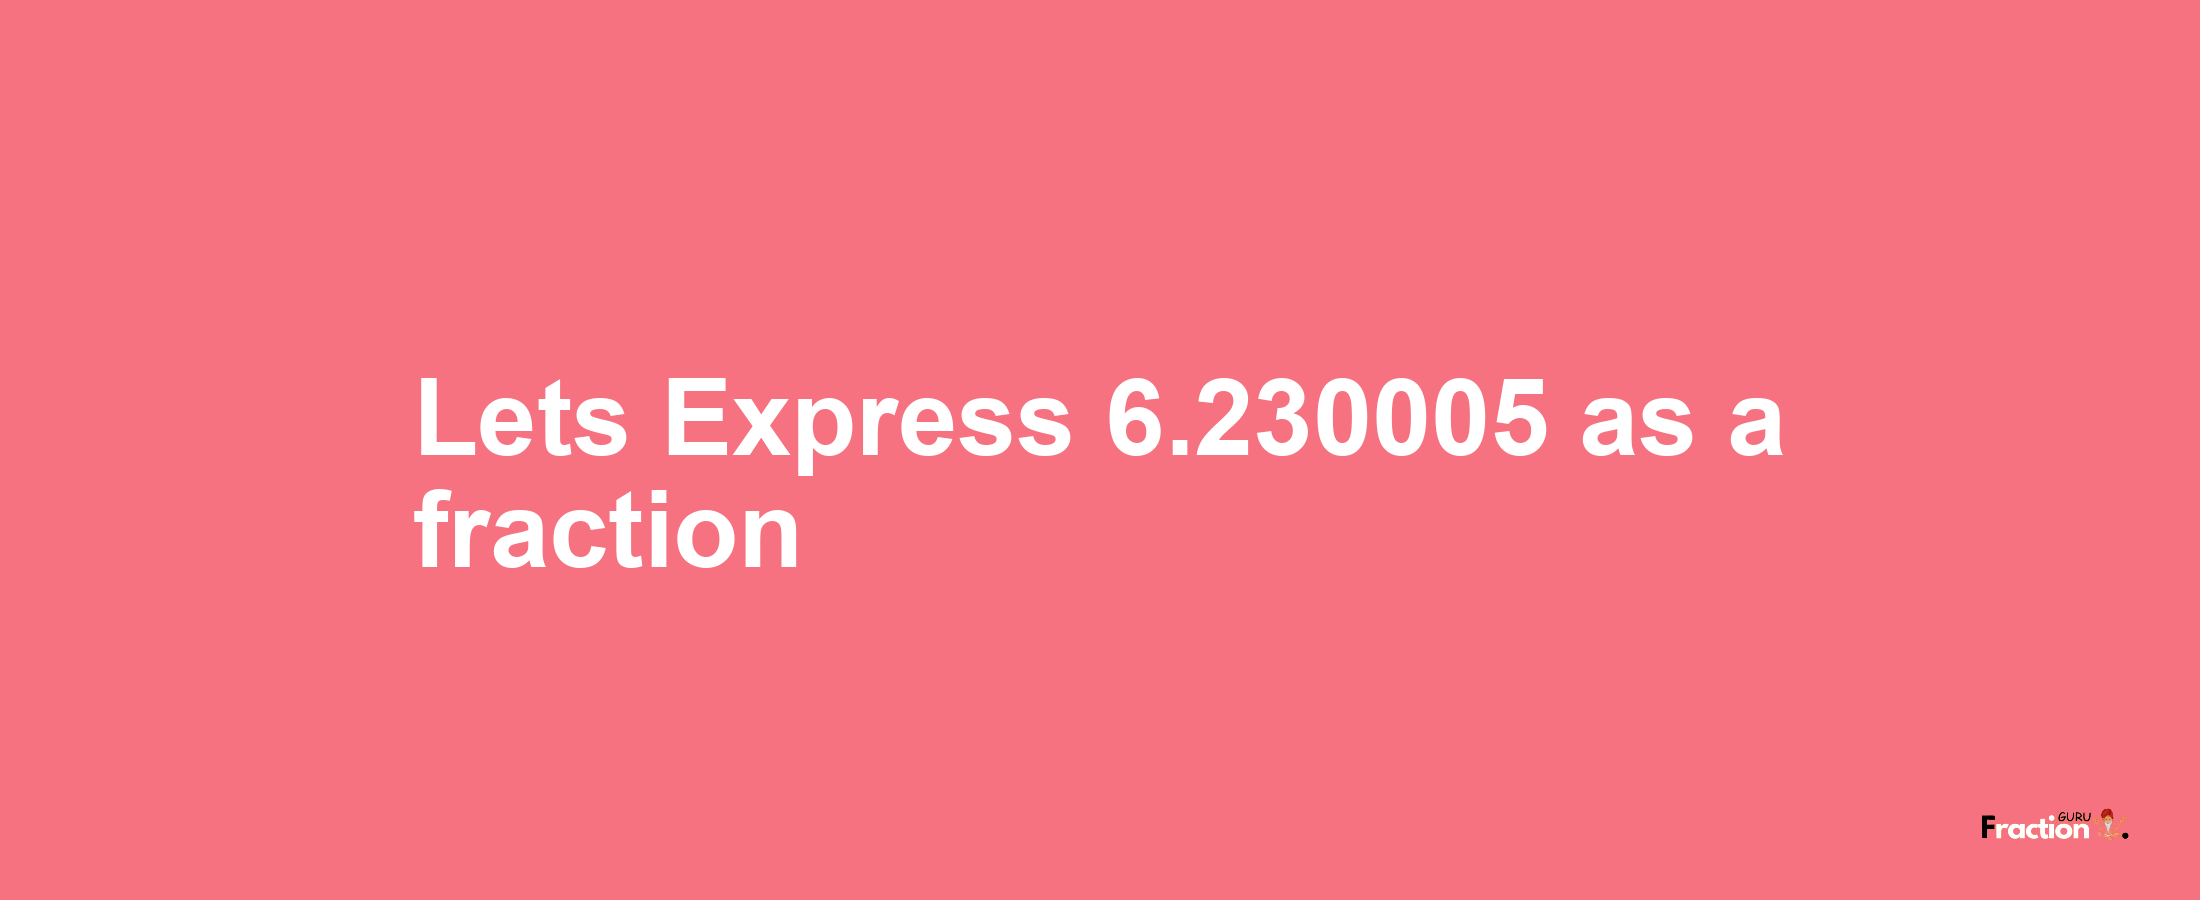 Lets Express 6.230005 as afraction